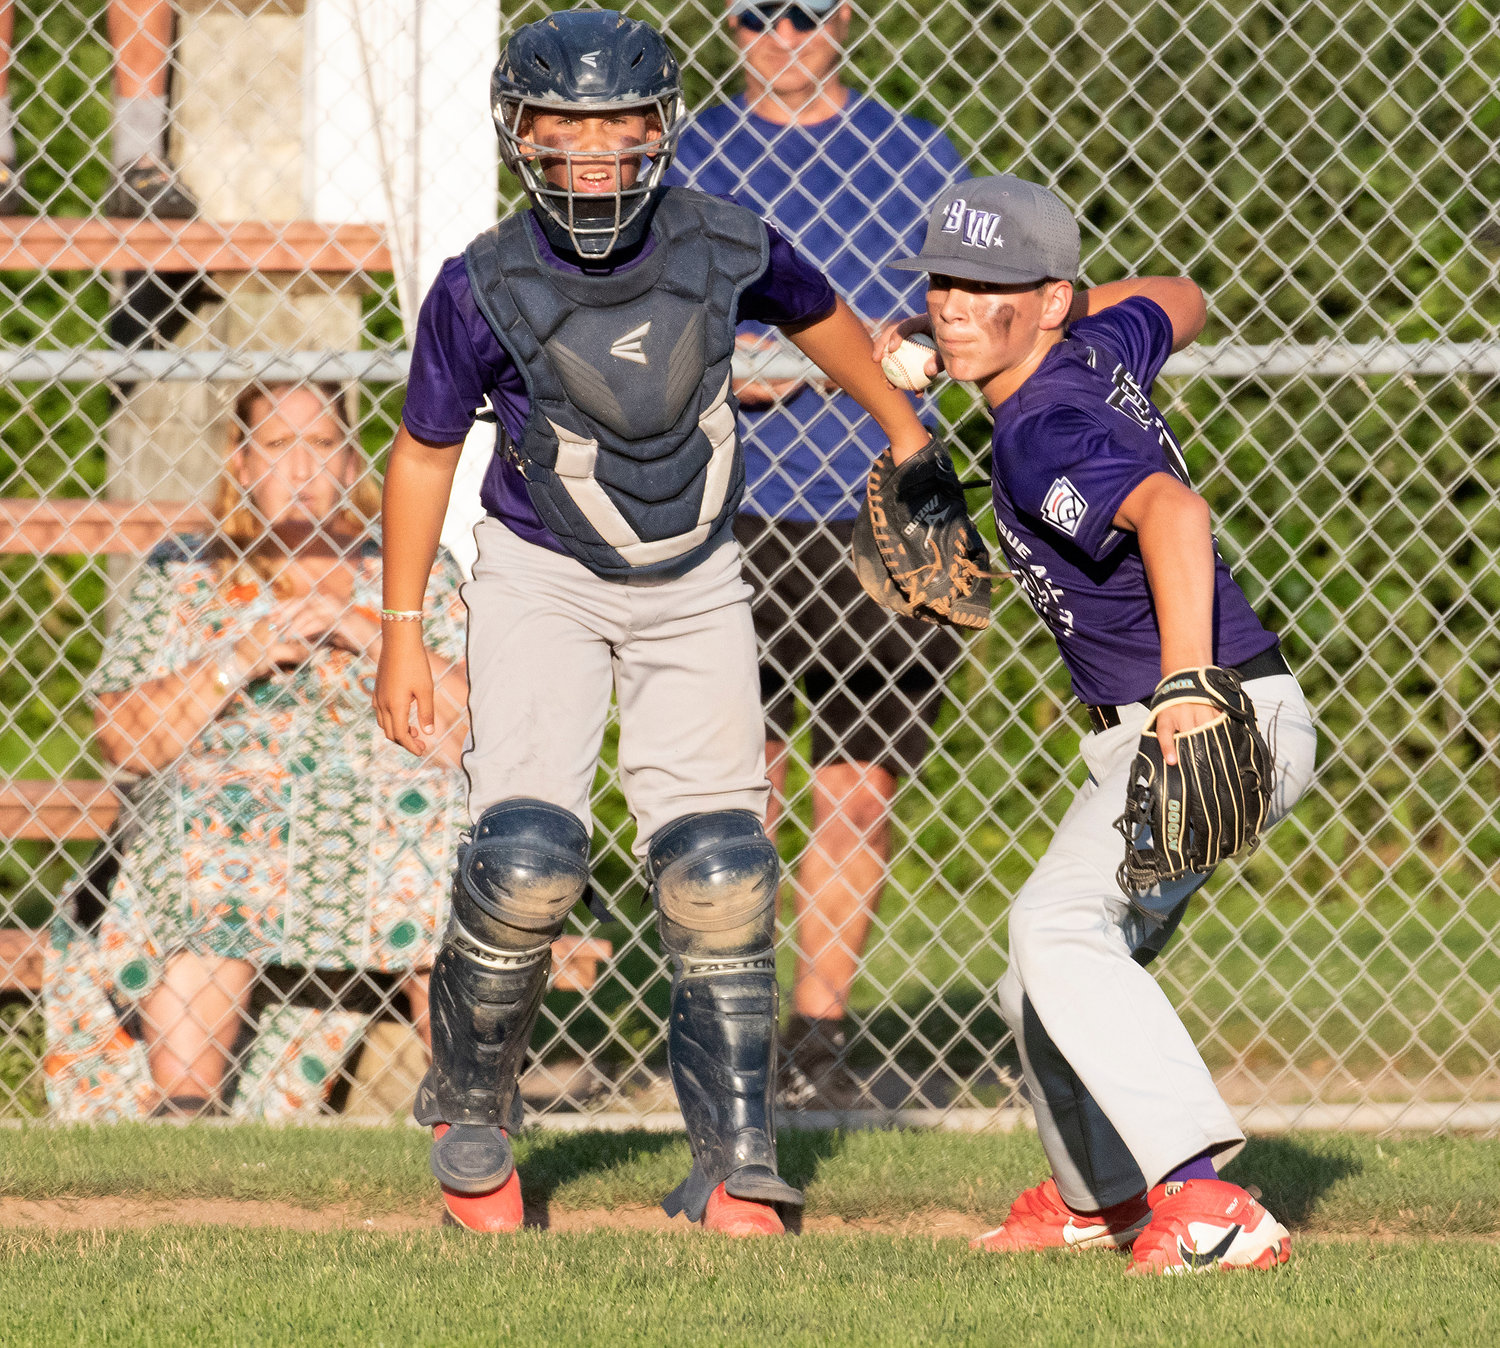 Bristol-Warren catcher Ryan Thompson looks on as pitcher Michael Towers fields a bunt during the game.